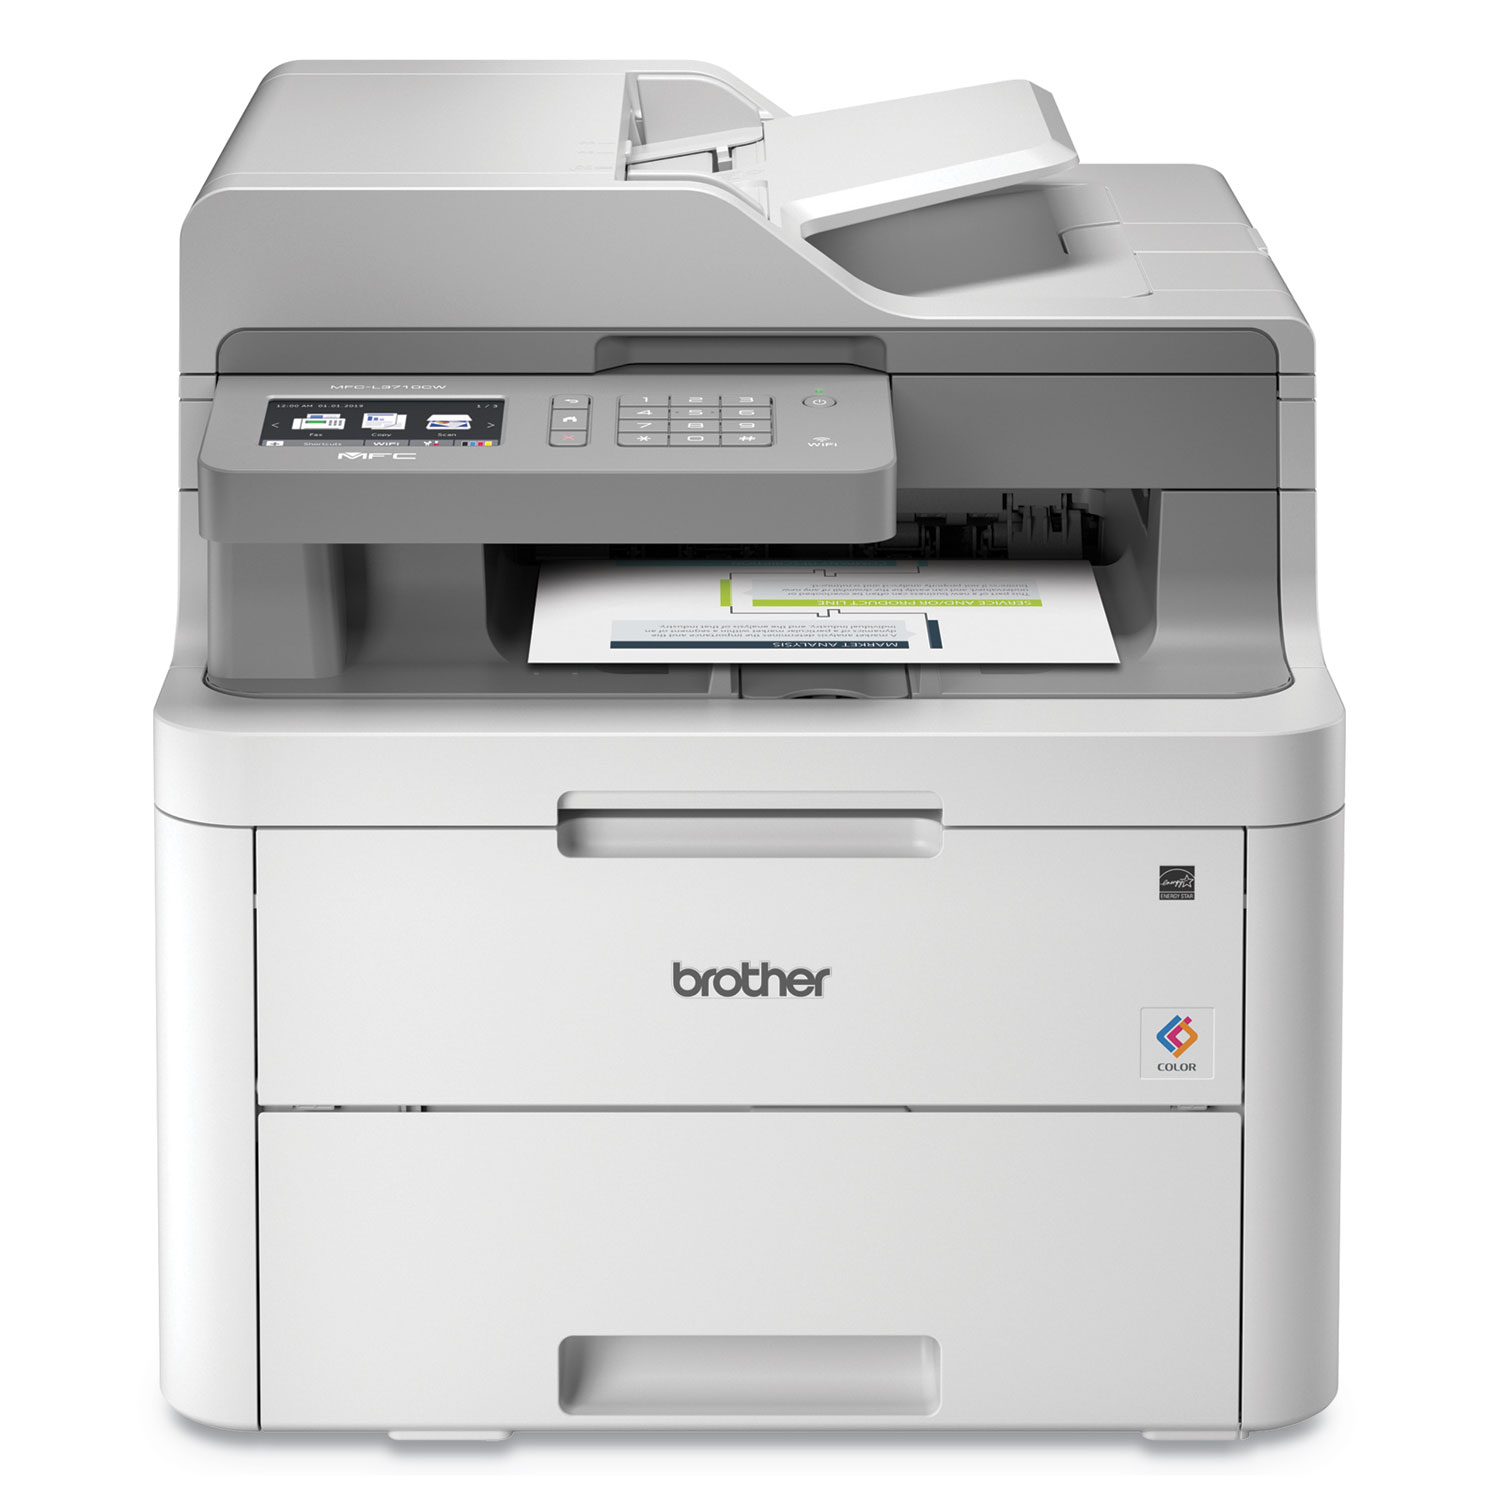  Brother MFCL3710CW MFC-L3710CW Compact Wireless Color All-in-One Printer, Copy/Fax/Print/Scan (BRTMFCL3710CW) 